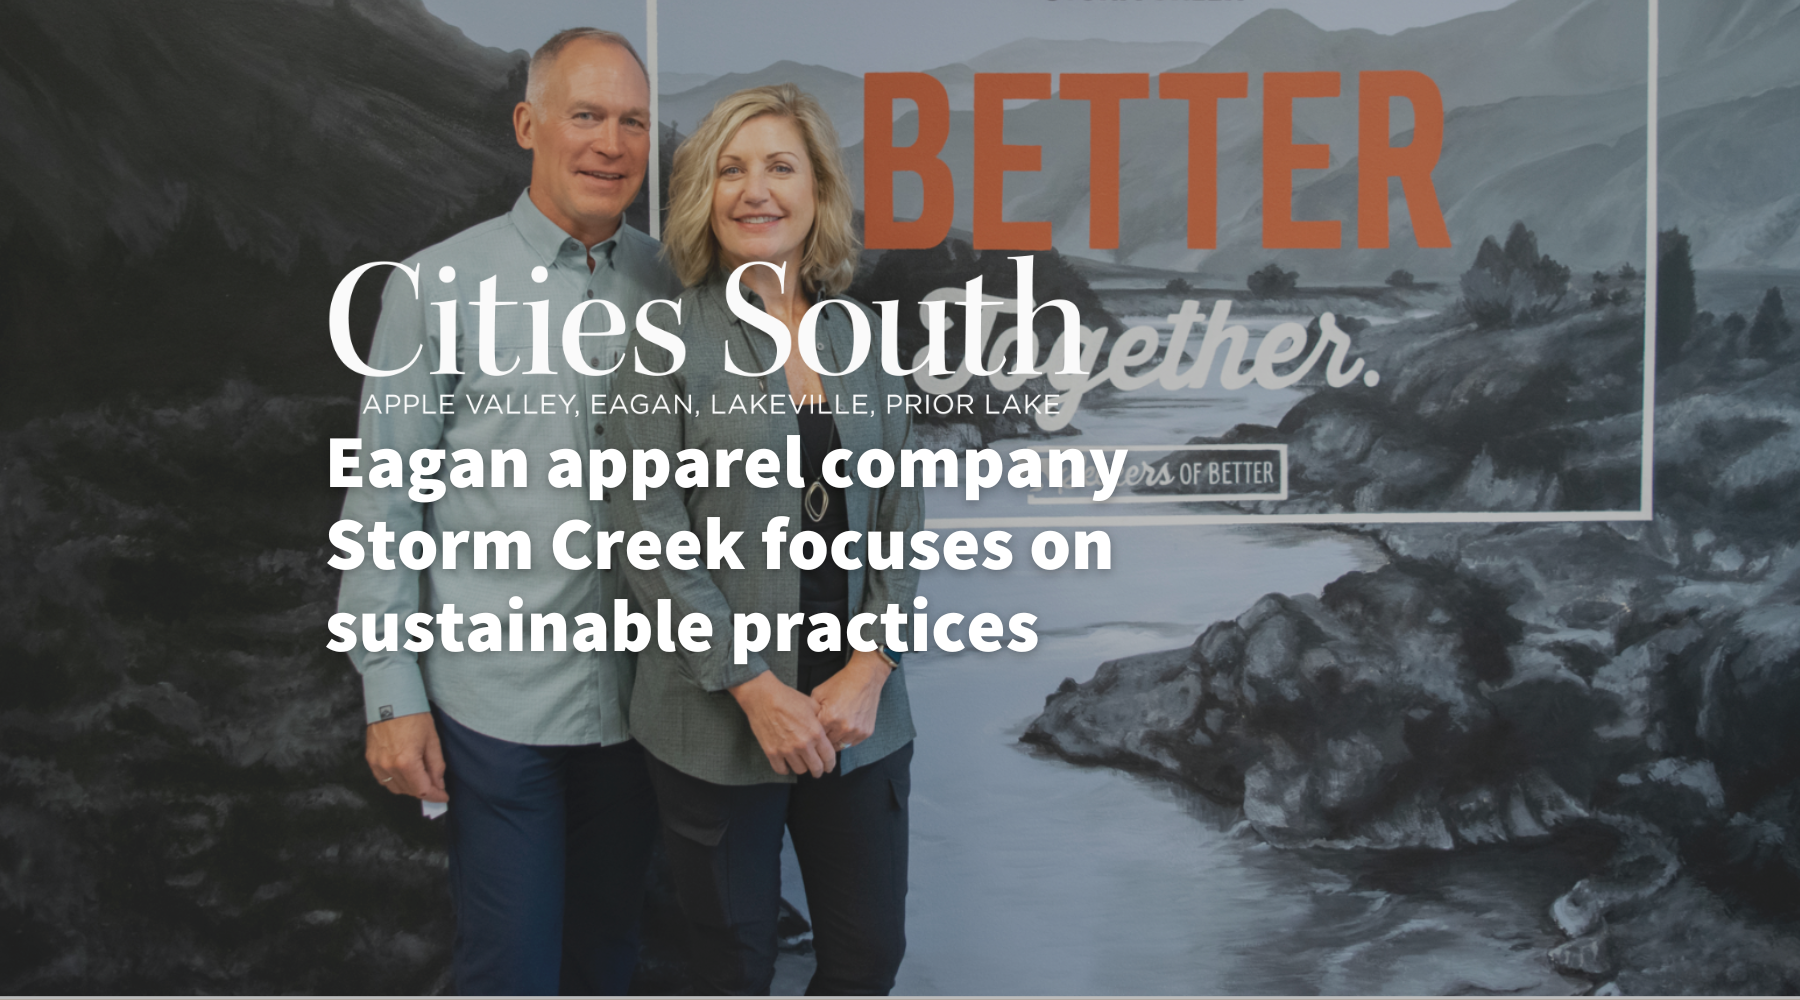 As Seen In Cities South Magazine: Eagan apparel company Storm Creek focuses on sustainable practices